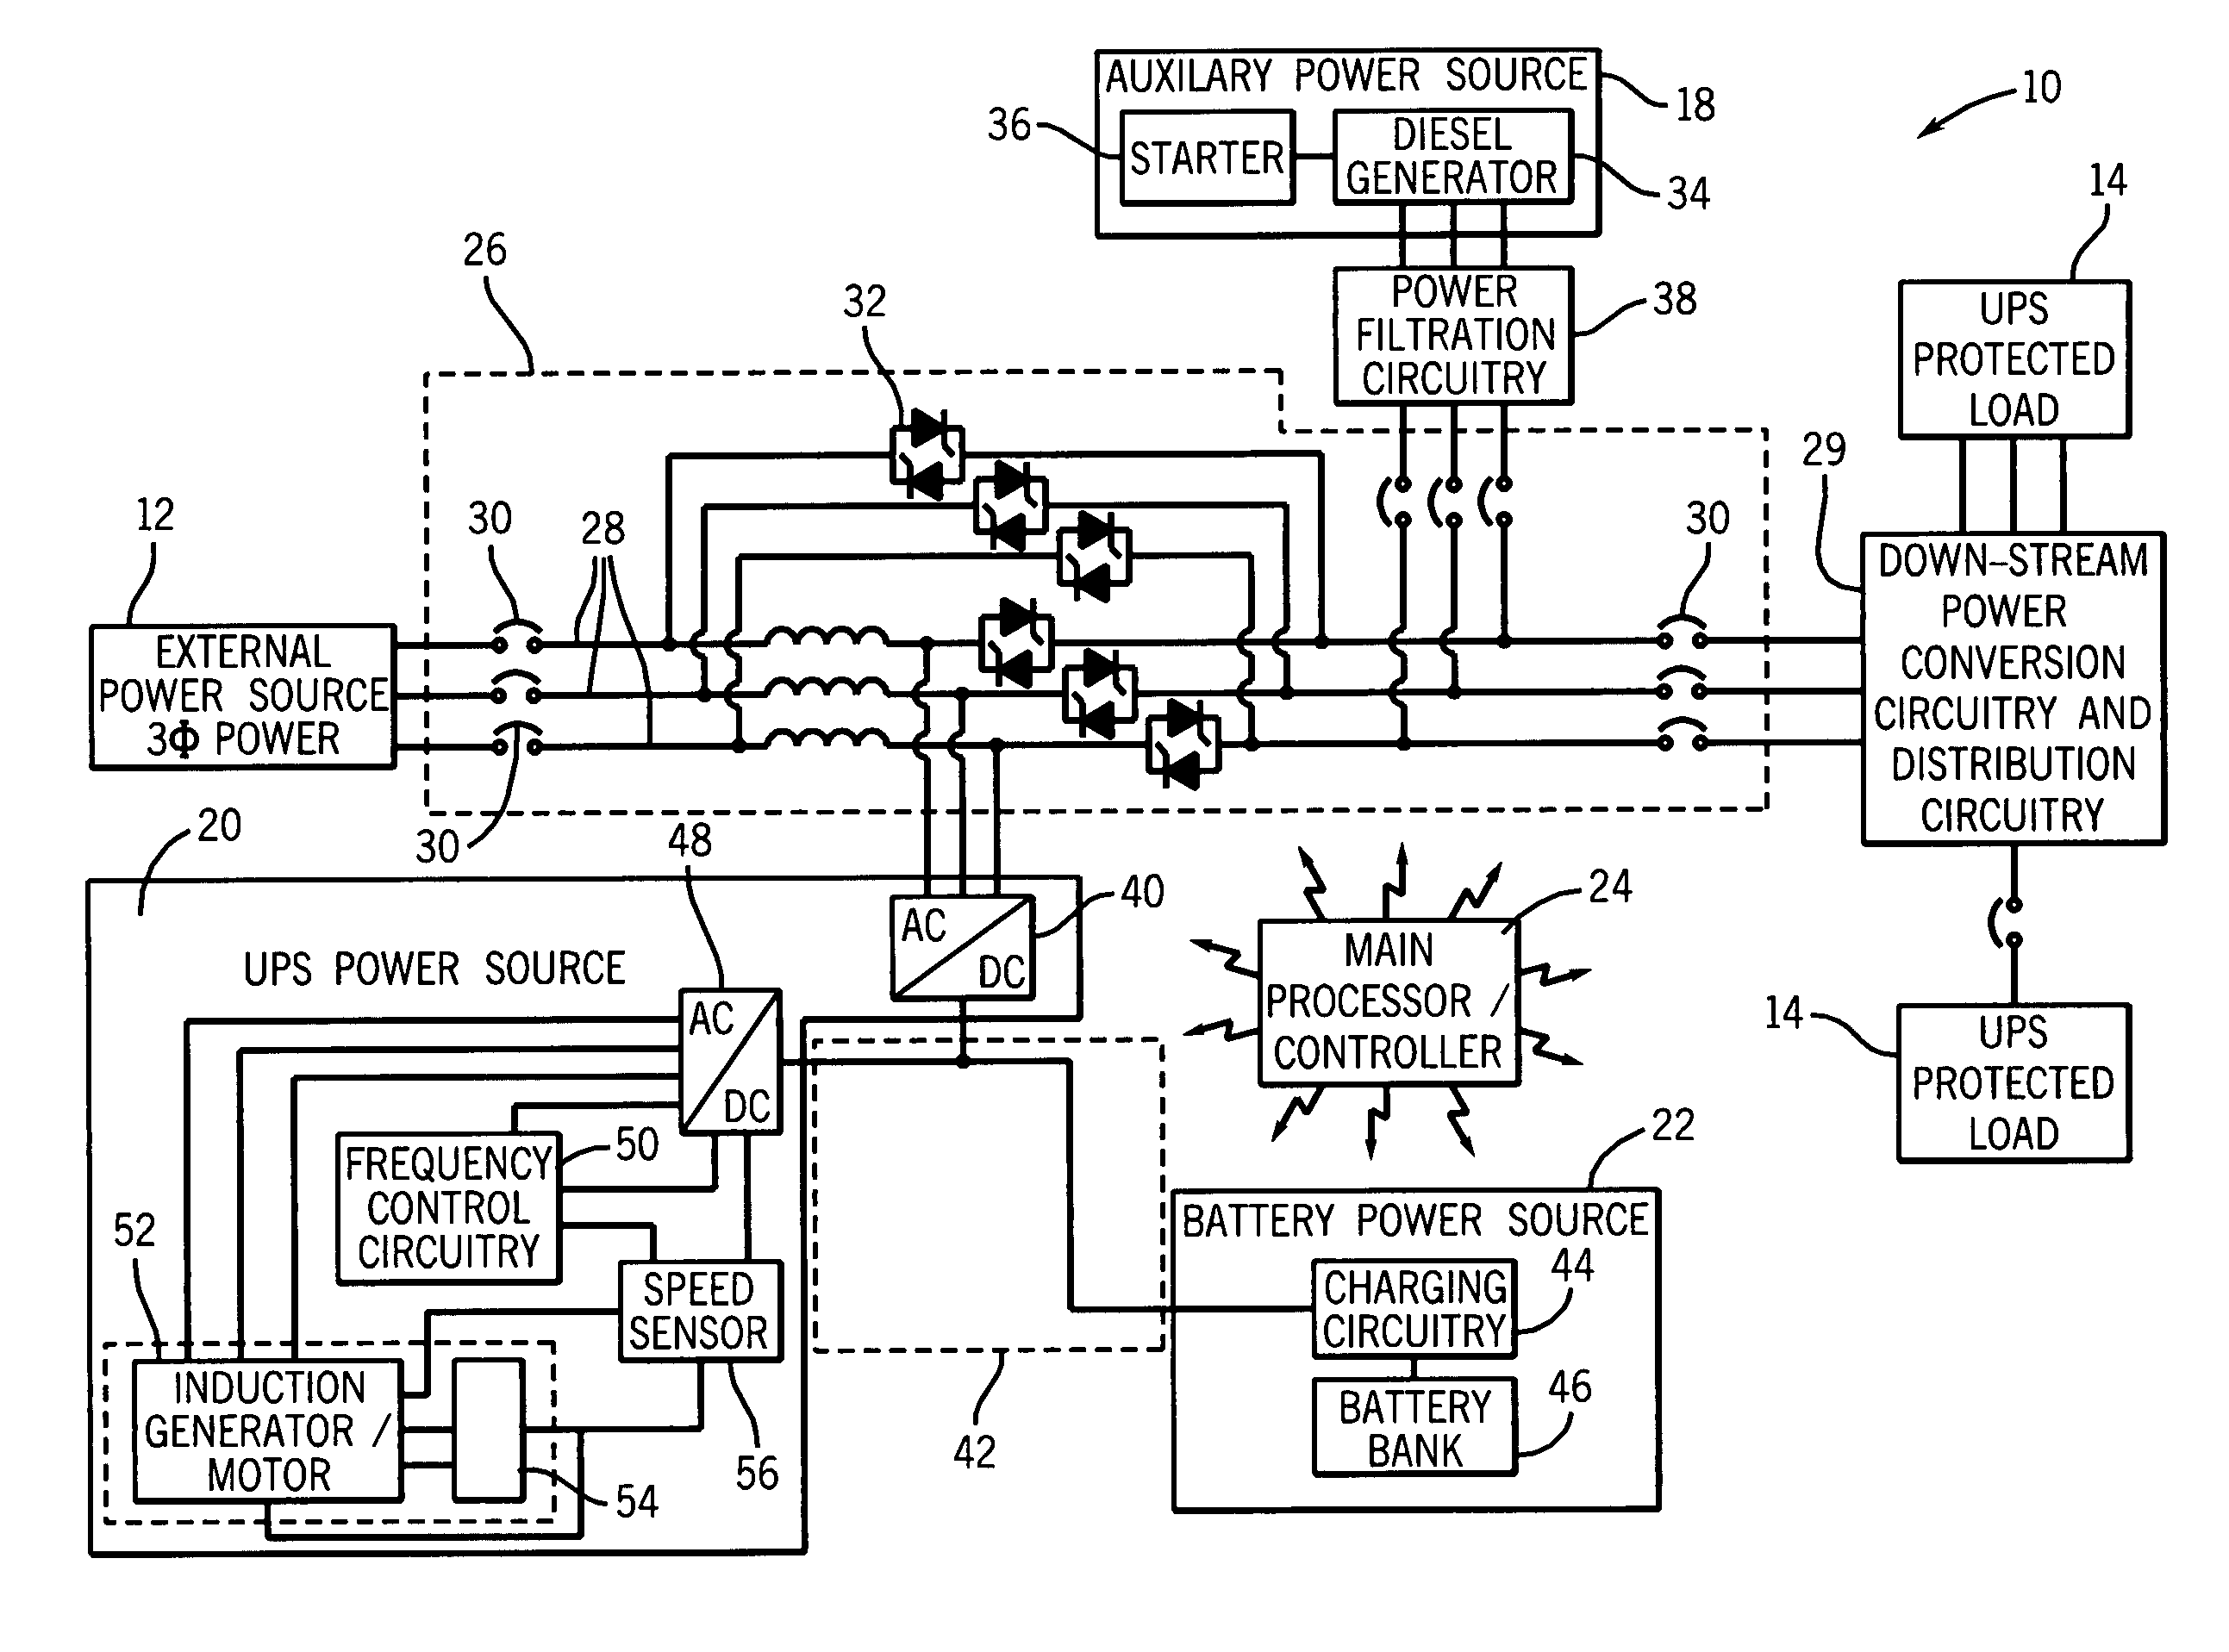 Apparatus and method for transient and uninterruptible power